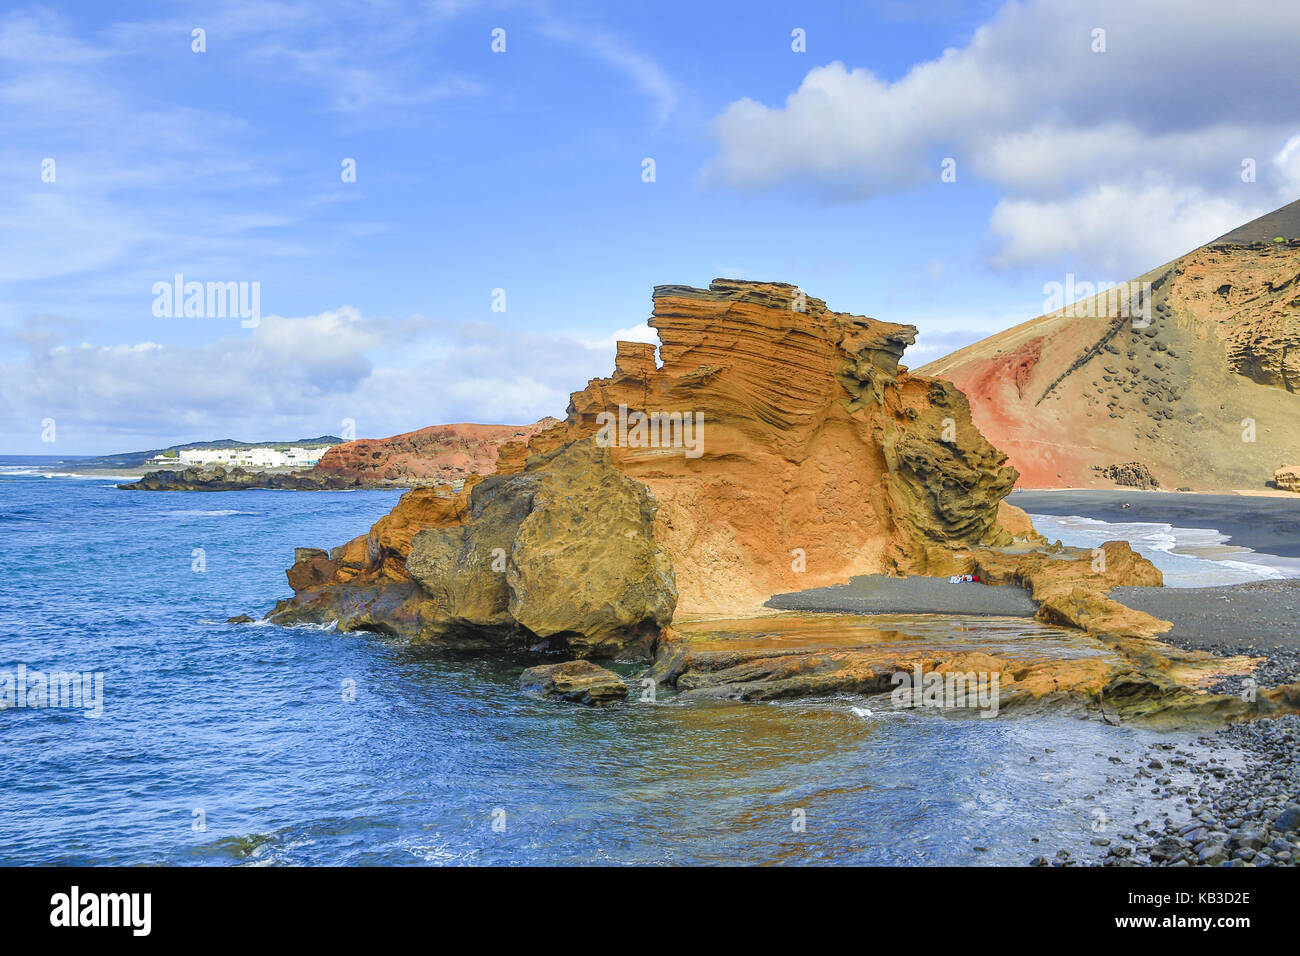 Spain, Canary islands, Lanzarote, Timanfaya national park, El Golfo, bay, rock, sea, place in the background, Stock Photo